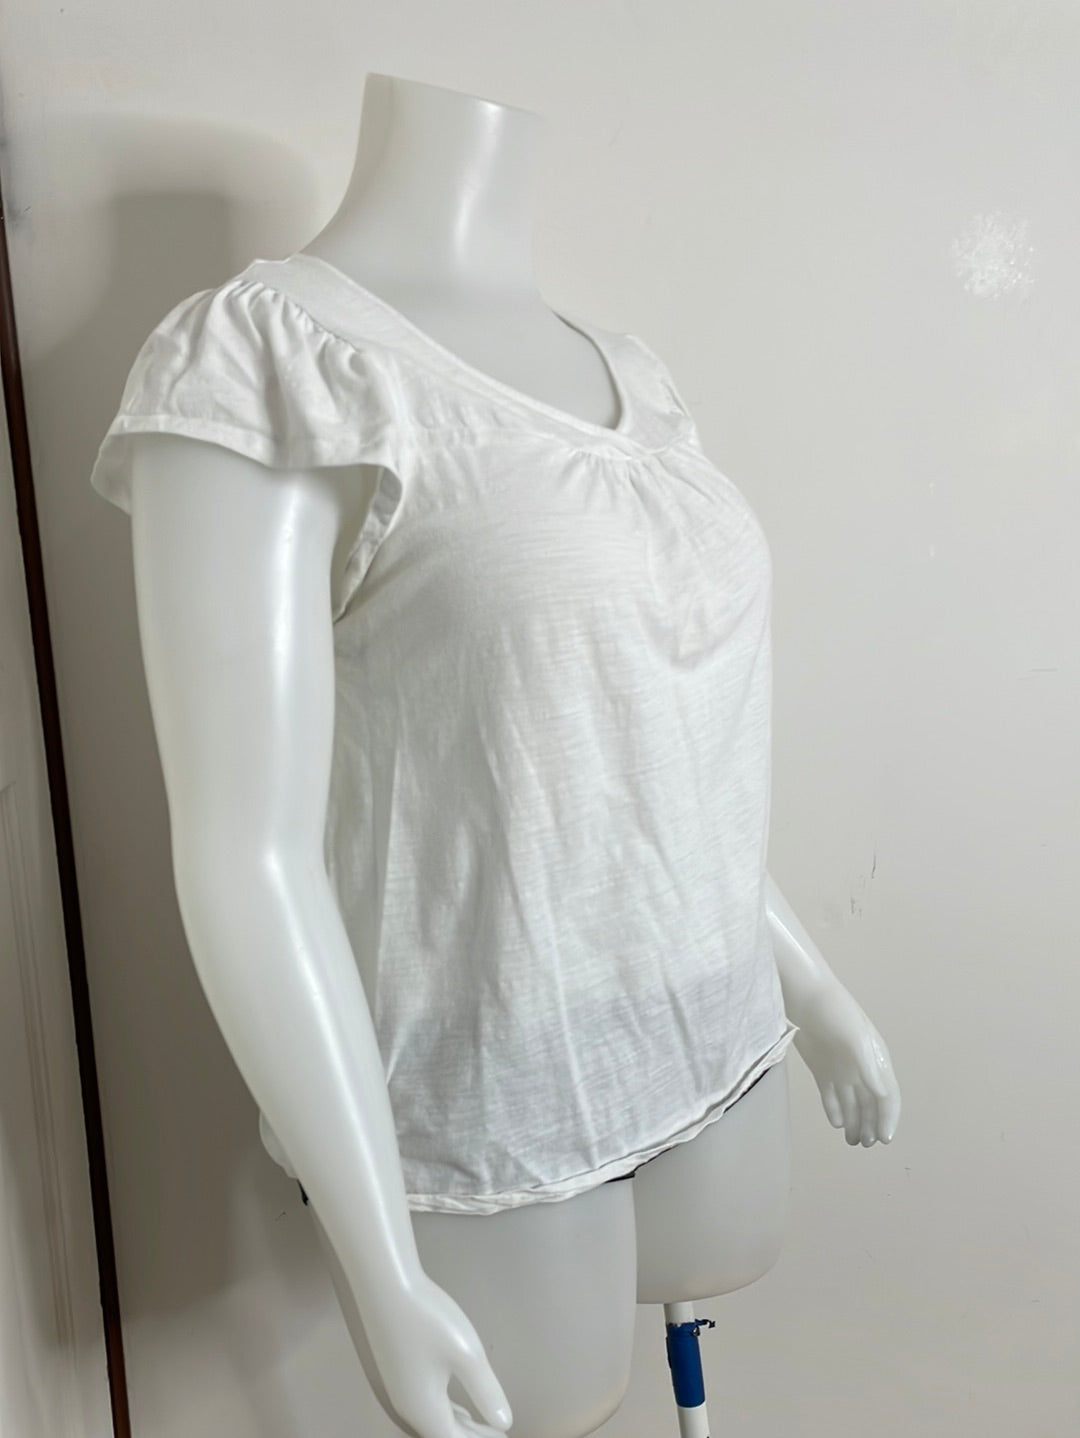 “Old Navy” White Cap Sleeved T-Shirt (XL)